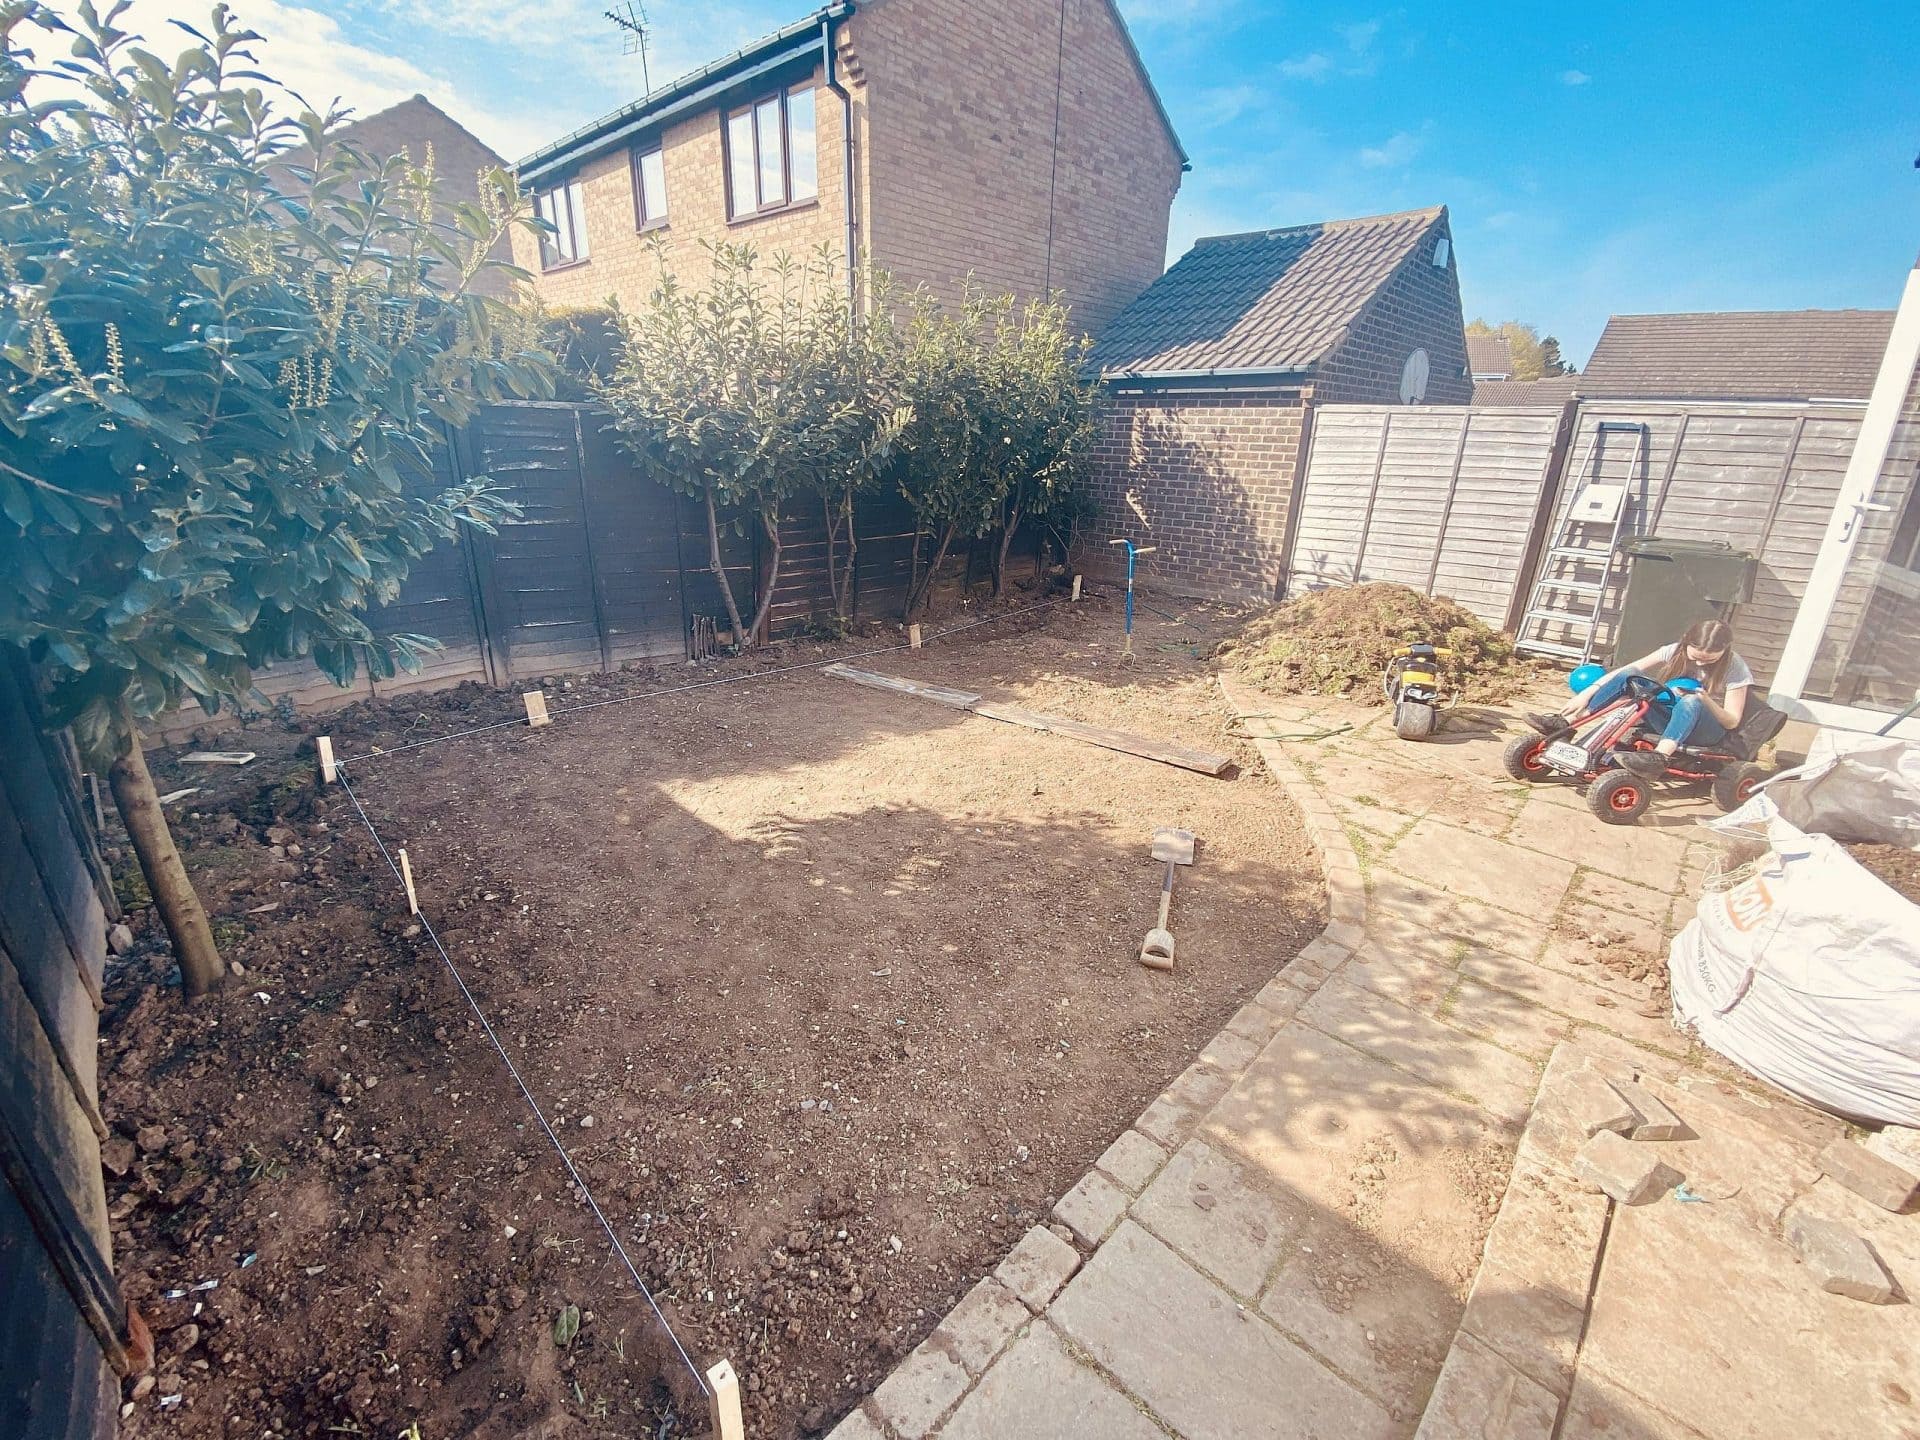 Garden After Turf Has Been Removed